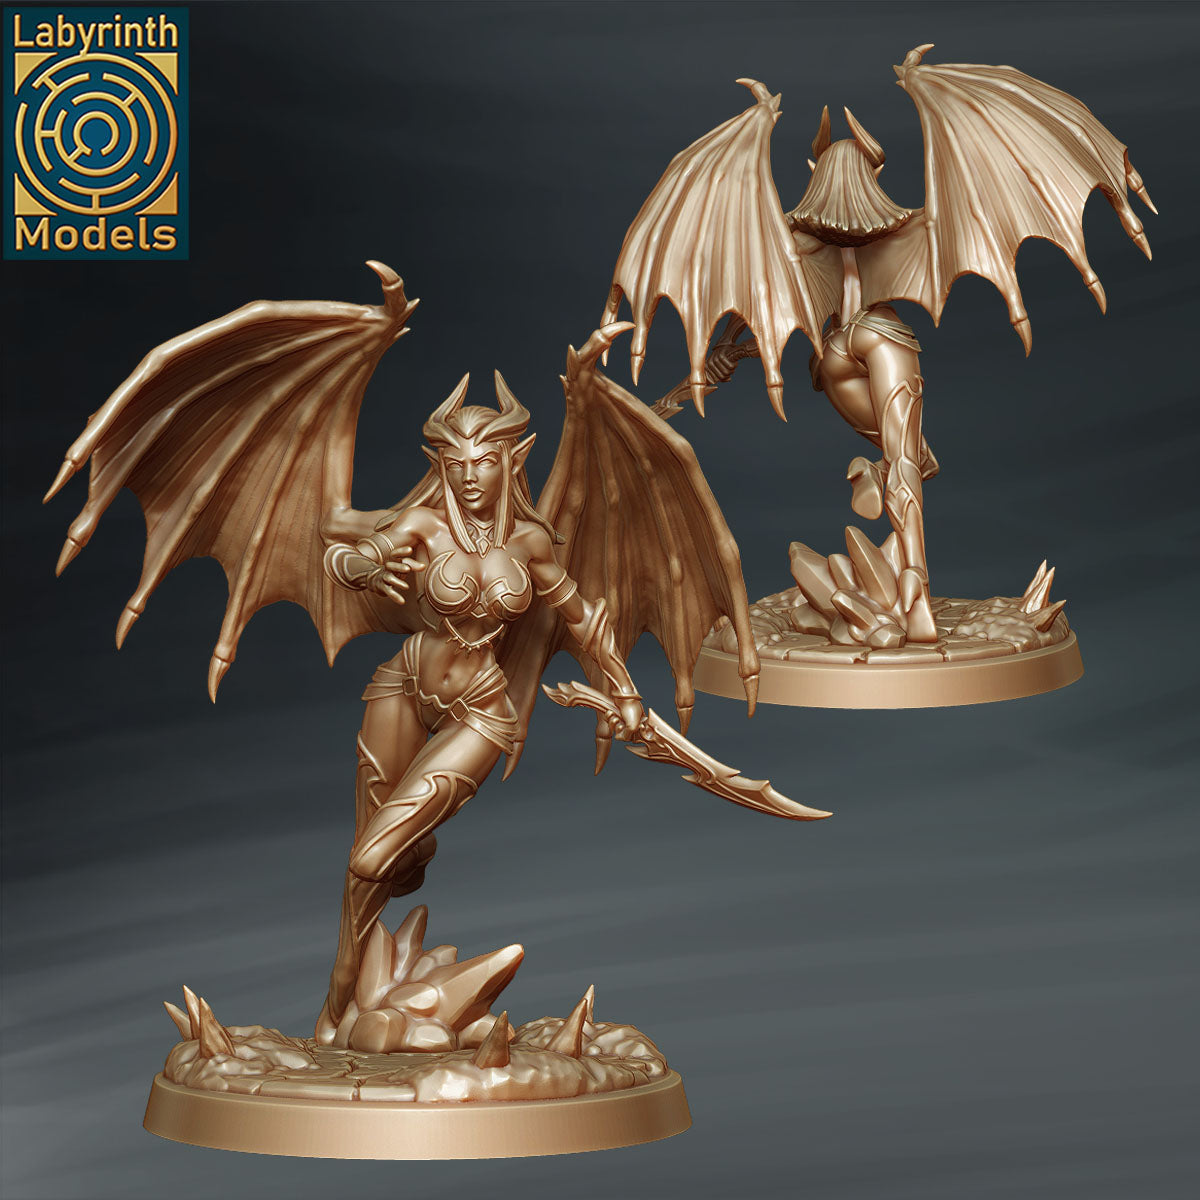 Succubus by Labyrinth Models